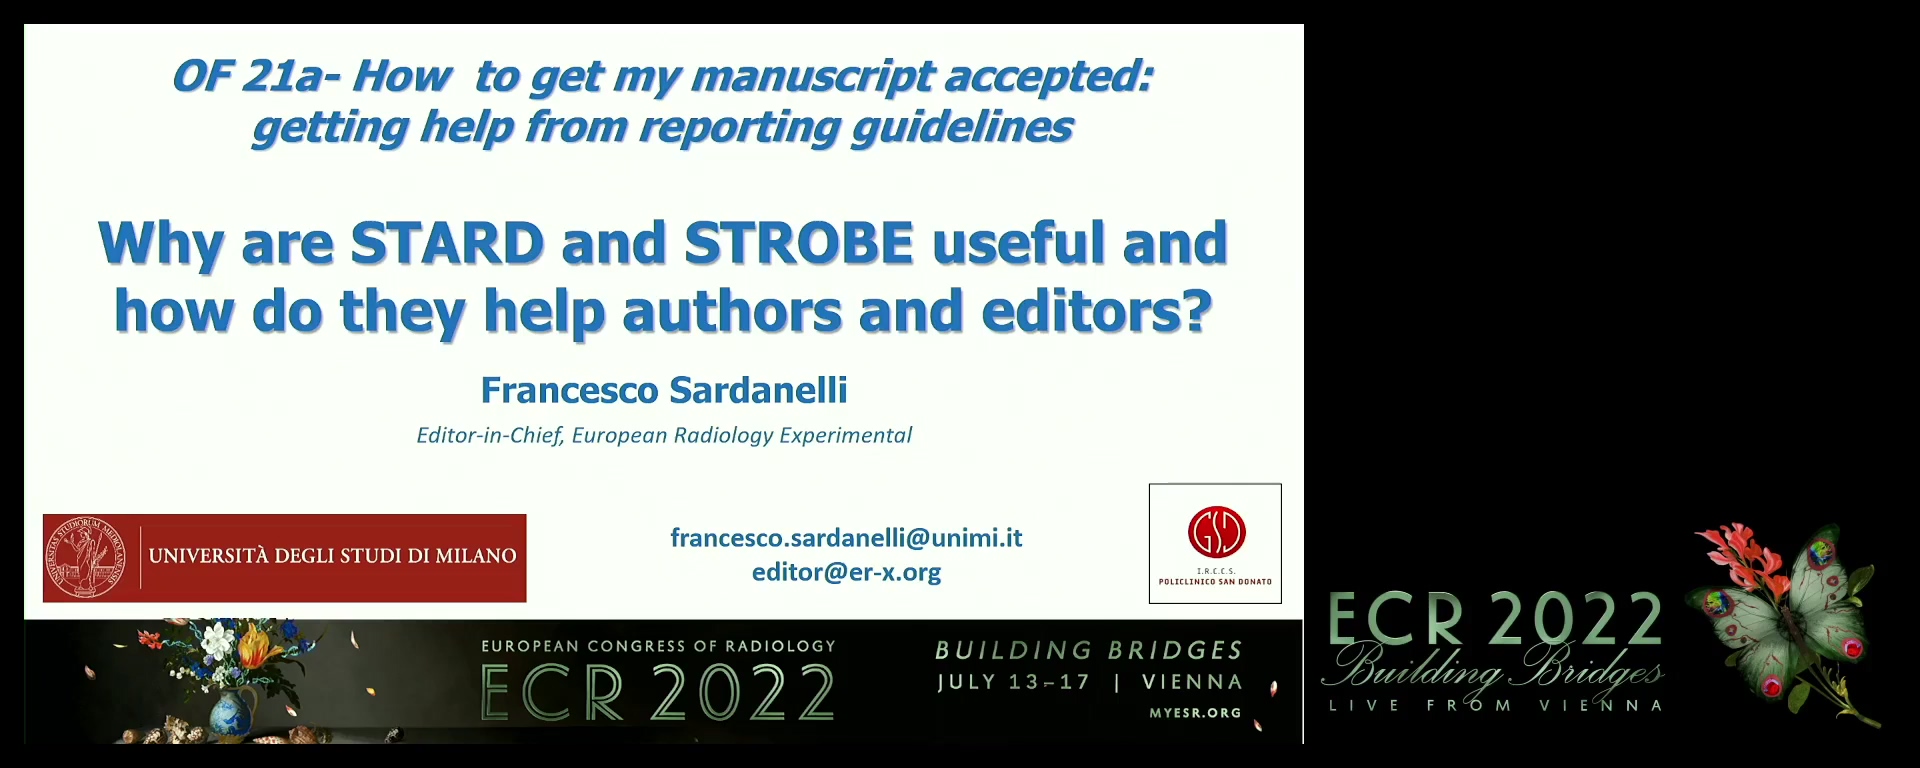 Why are STARD and STROBE useful and how does it help authors and editors?